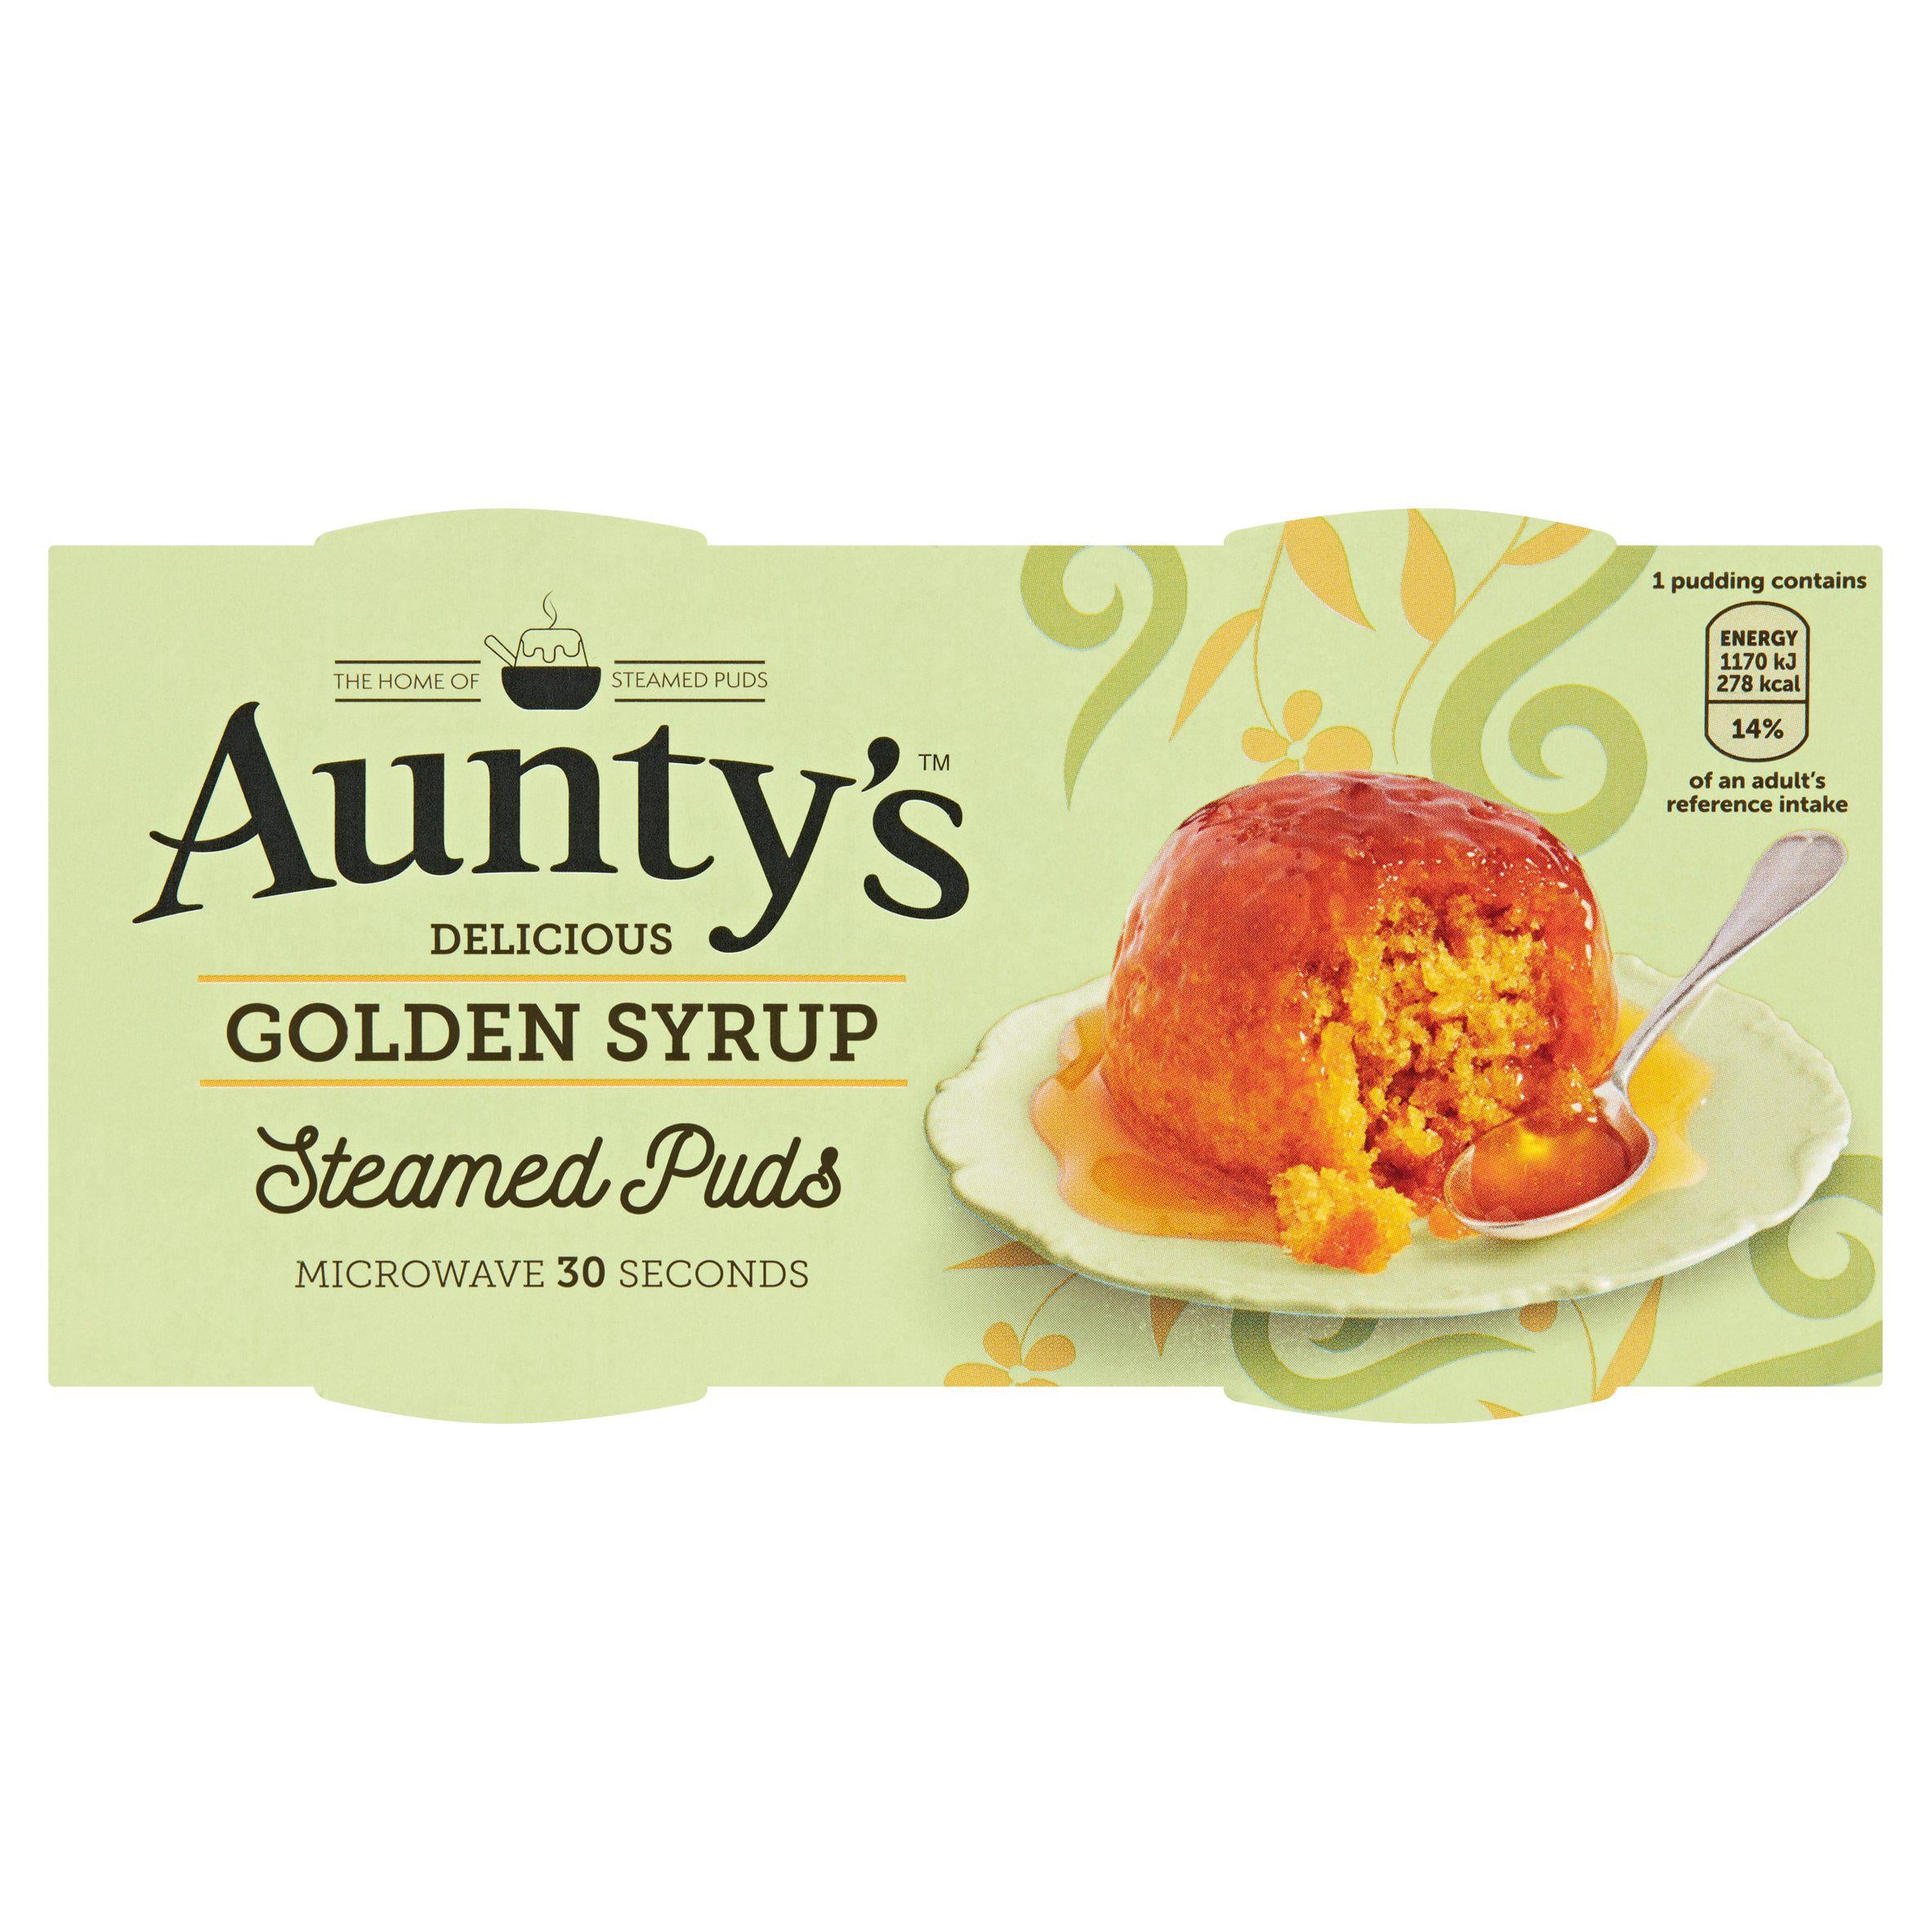 Aunty's Golden Syrup Steamed Pudding 2x100g Rice & sponge pudding Sainsburys   